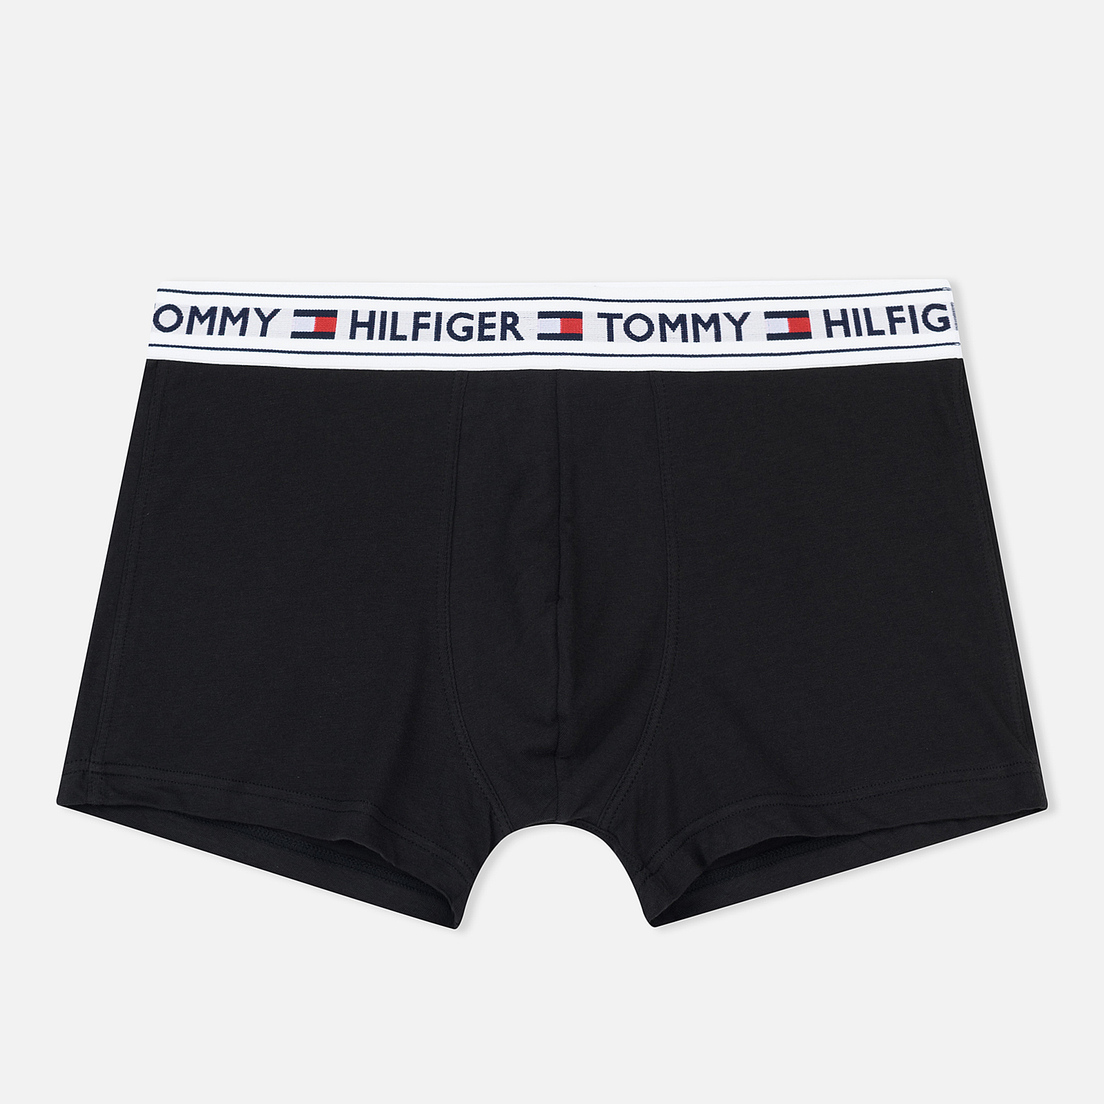 where can i buy tommy hilfiger underwear